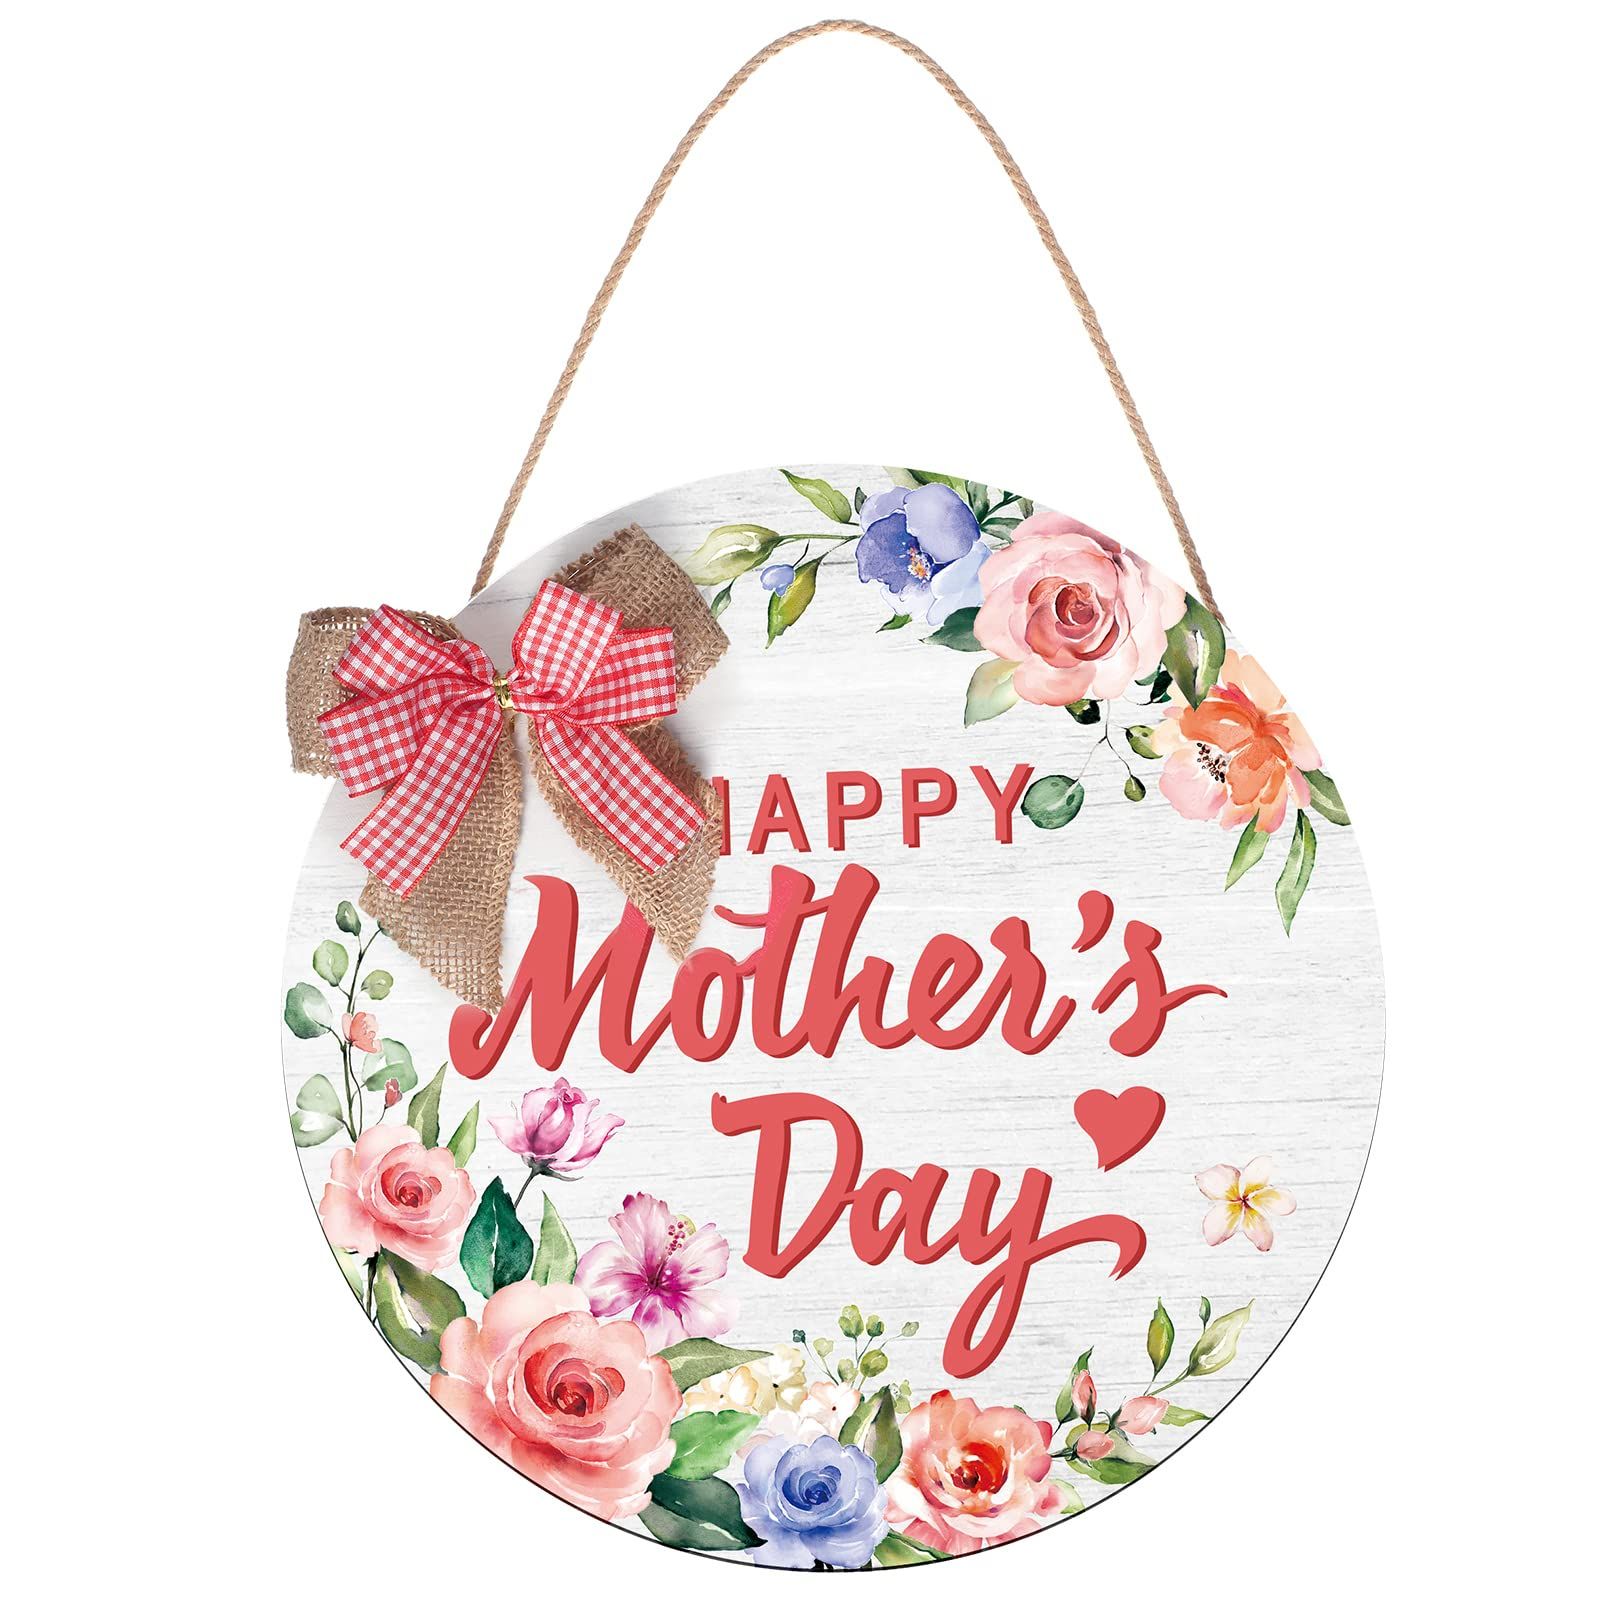 Aggregate more than 126 diy mother's day decorations super hot - vova ...